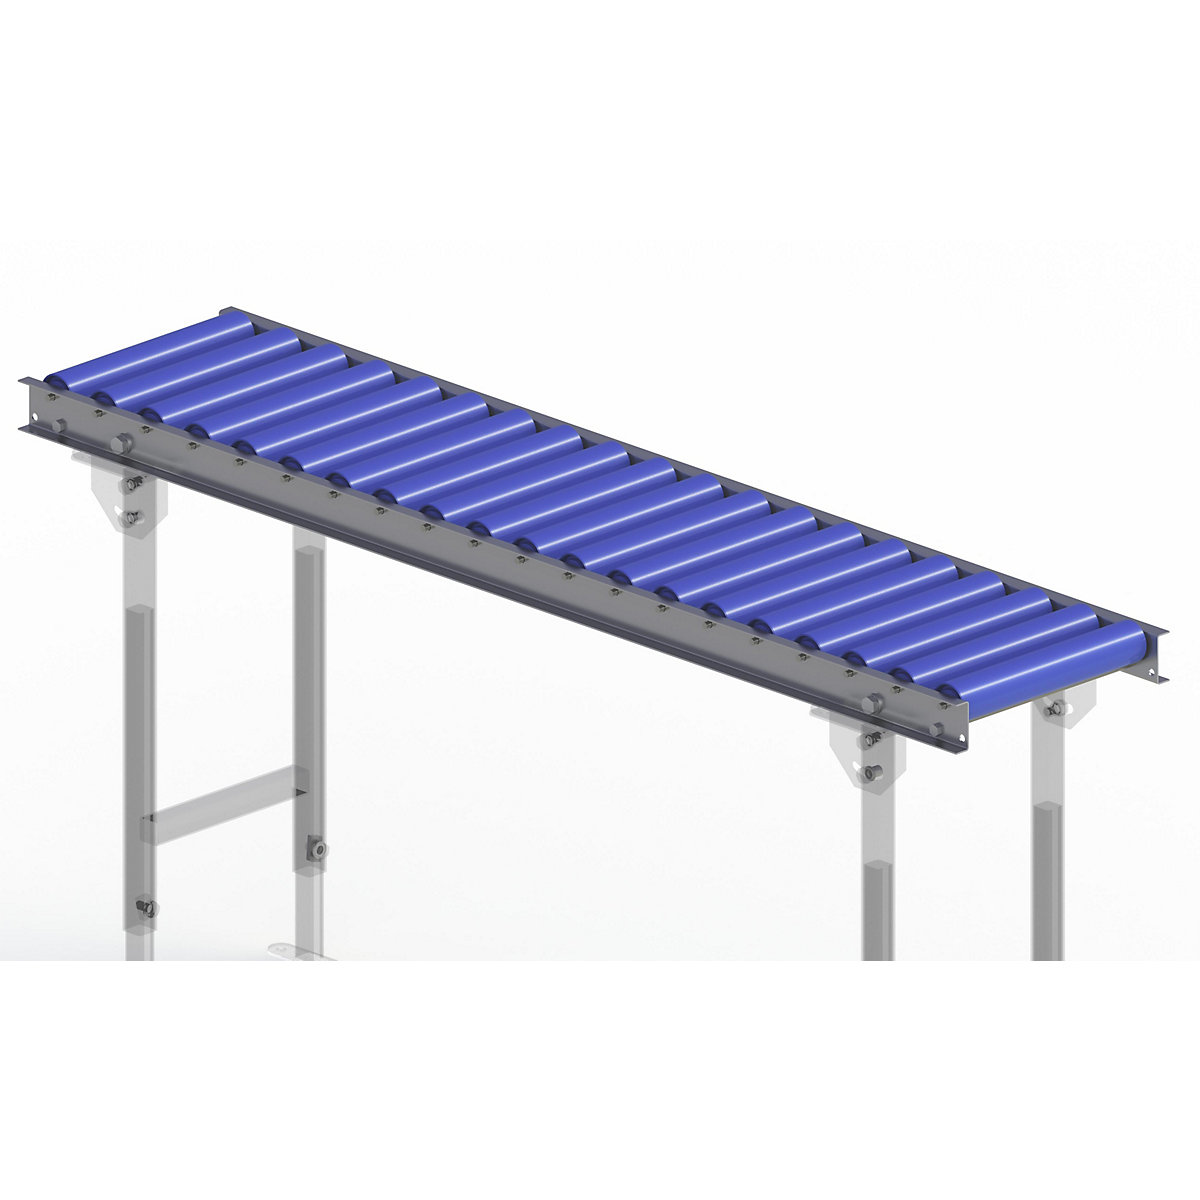 Gura – Light duty roller conveyor, steel frame with plastic rollers, track width 300 mm, axle spacing 75 mm, length 1.5 m